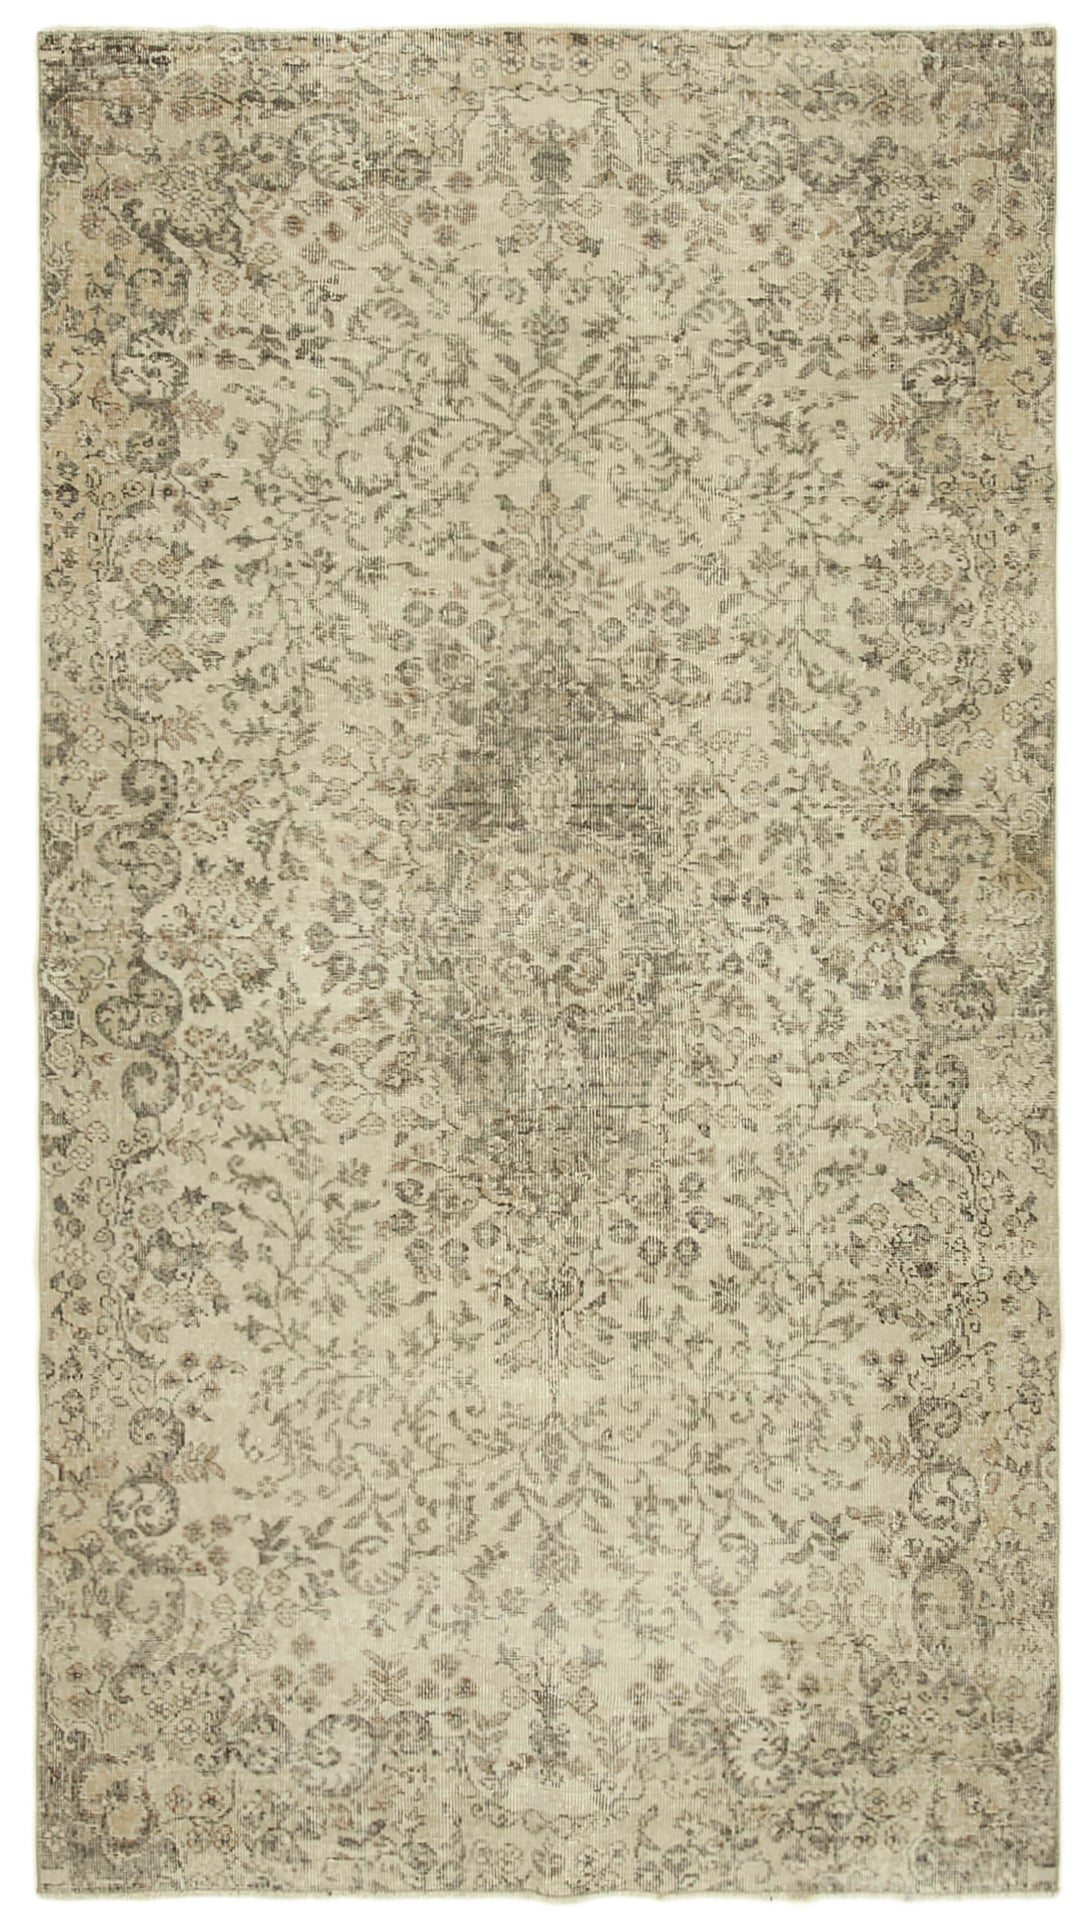 Handmade White Wash Area Rug > Design# OL-AC-39310 > Size: 5'-2" x 9'-2", Carpet Culture Rugs, Handmade Rugs, NYC Rugs, New Rugs, Shop Rugs, Rug Store, Outlet Rugs, SoHo Rugs, Rugs in USA